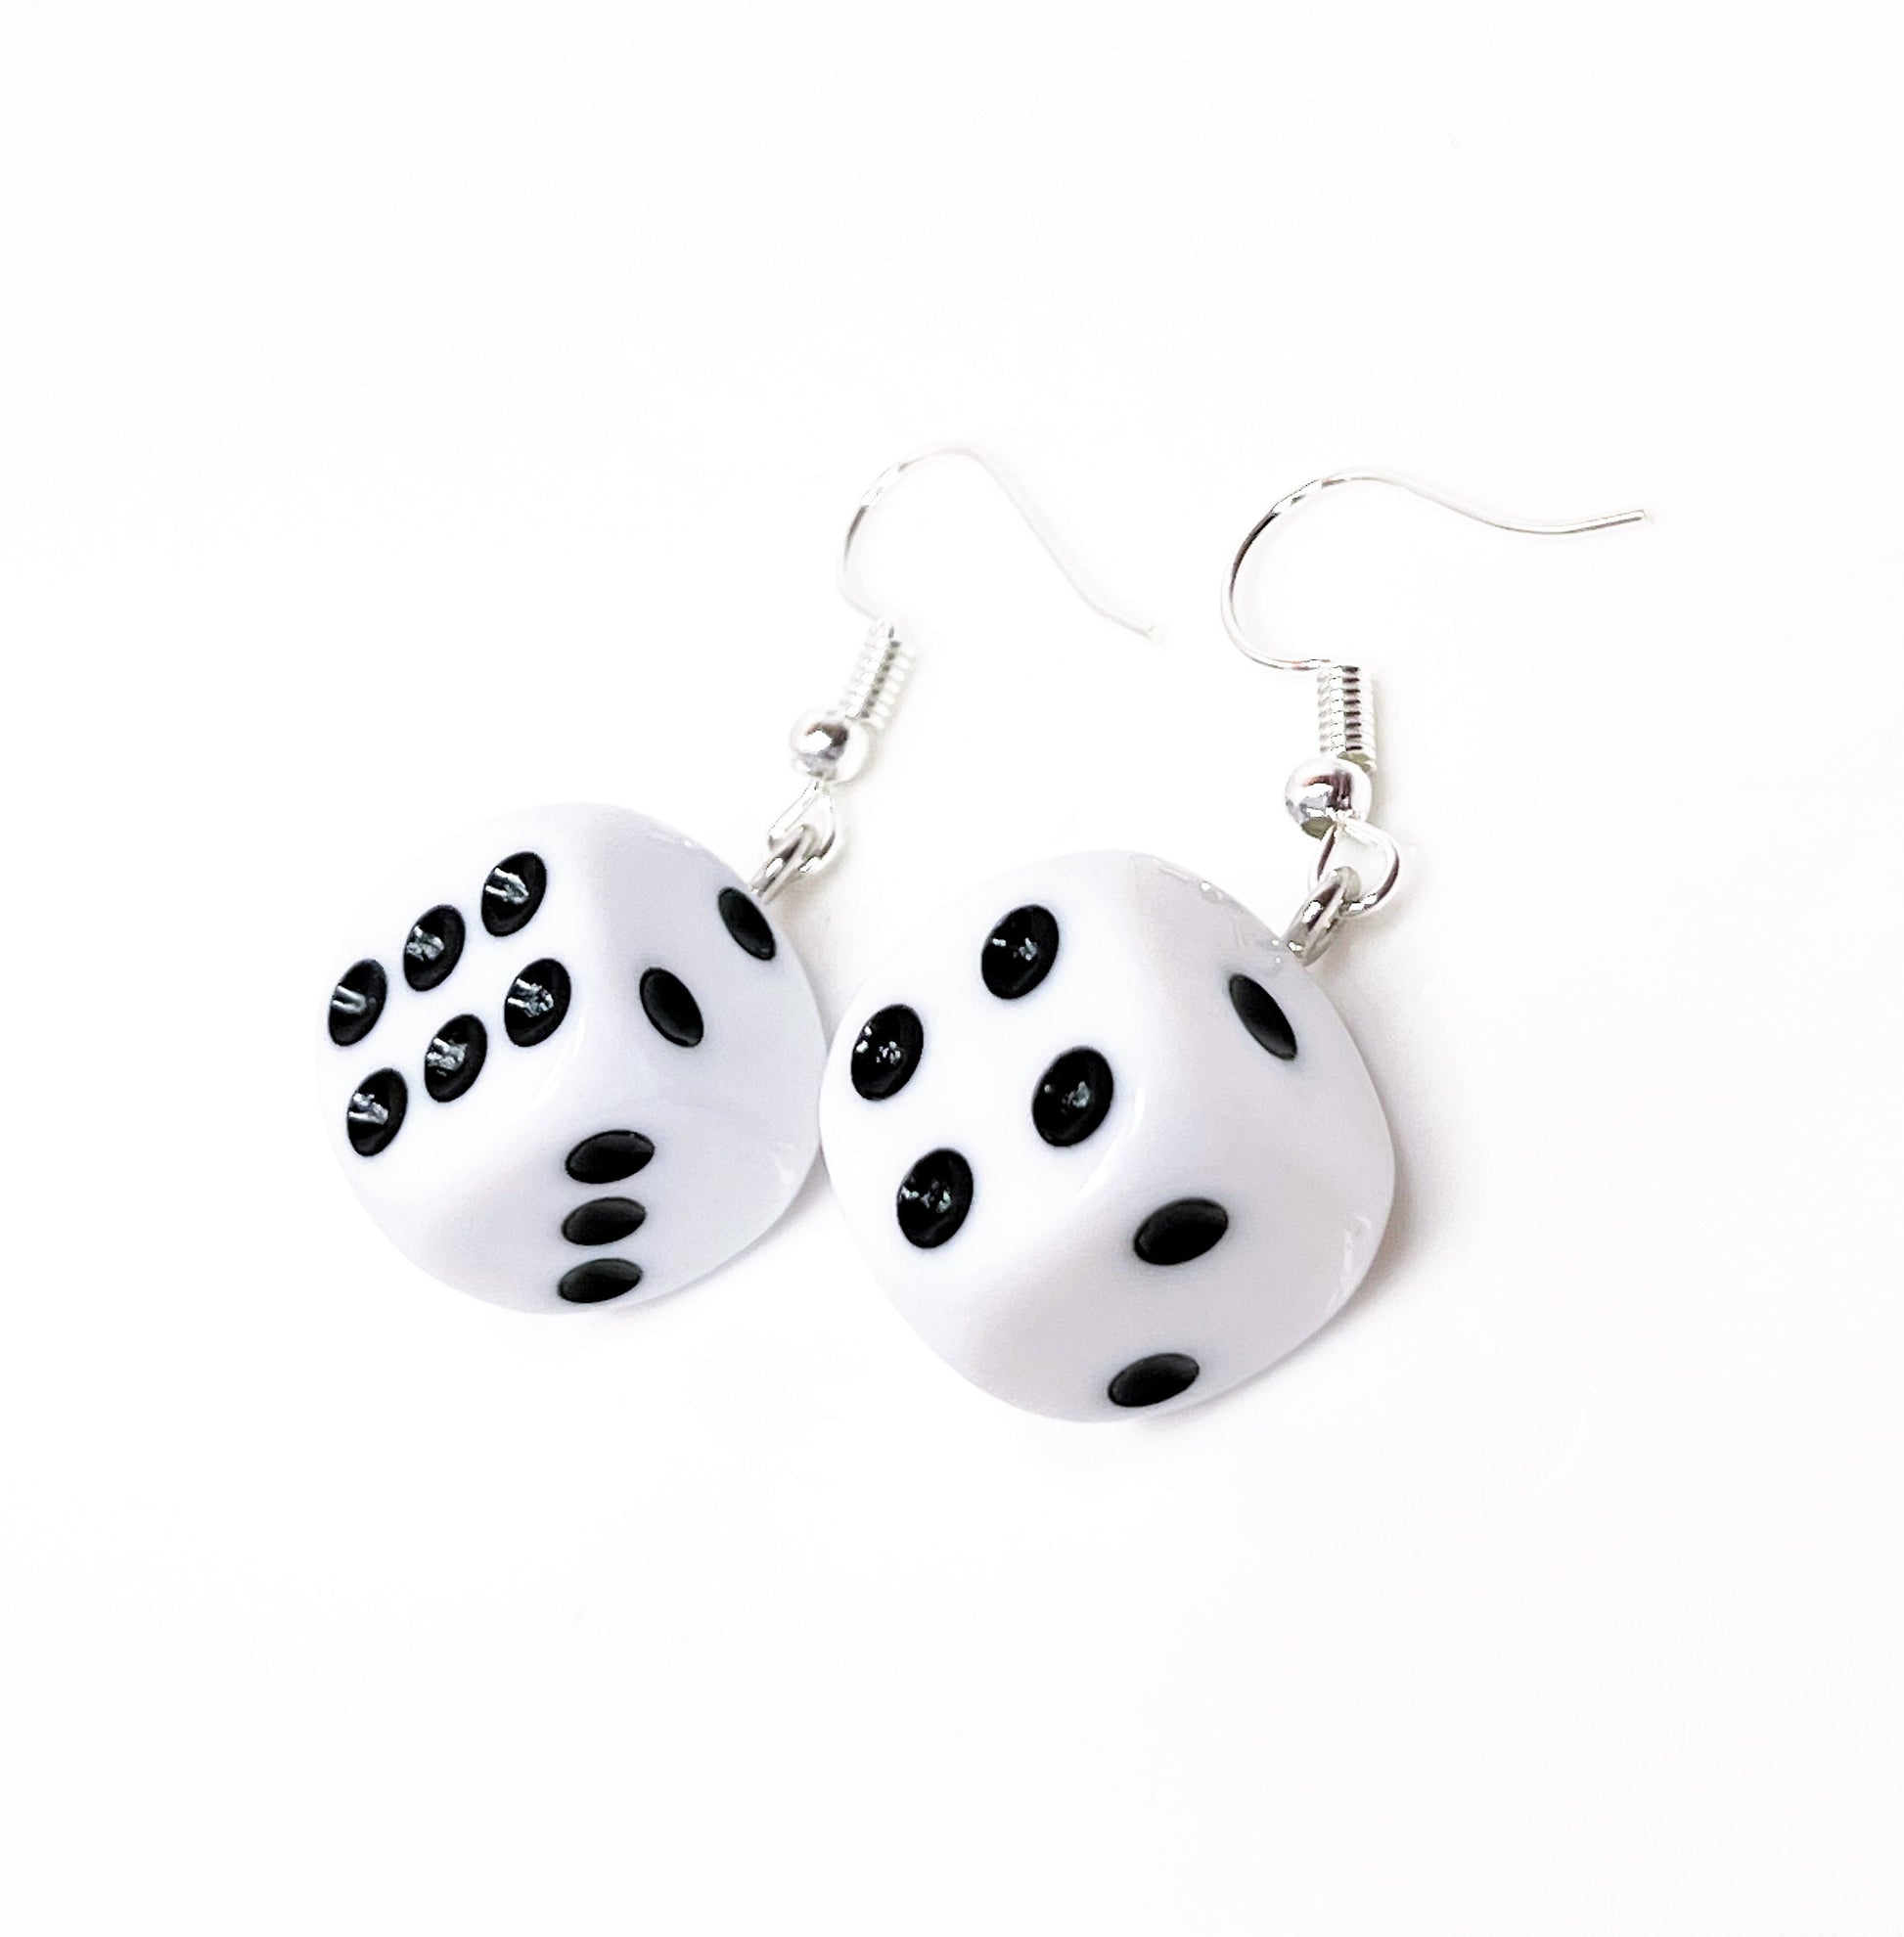 White Dice Earrings, Silver Plated, Sterling Silver, Quirky Earrings, Funky Drops, Earrings for Women, Fun Game Dangles, Game Lovers Drops